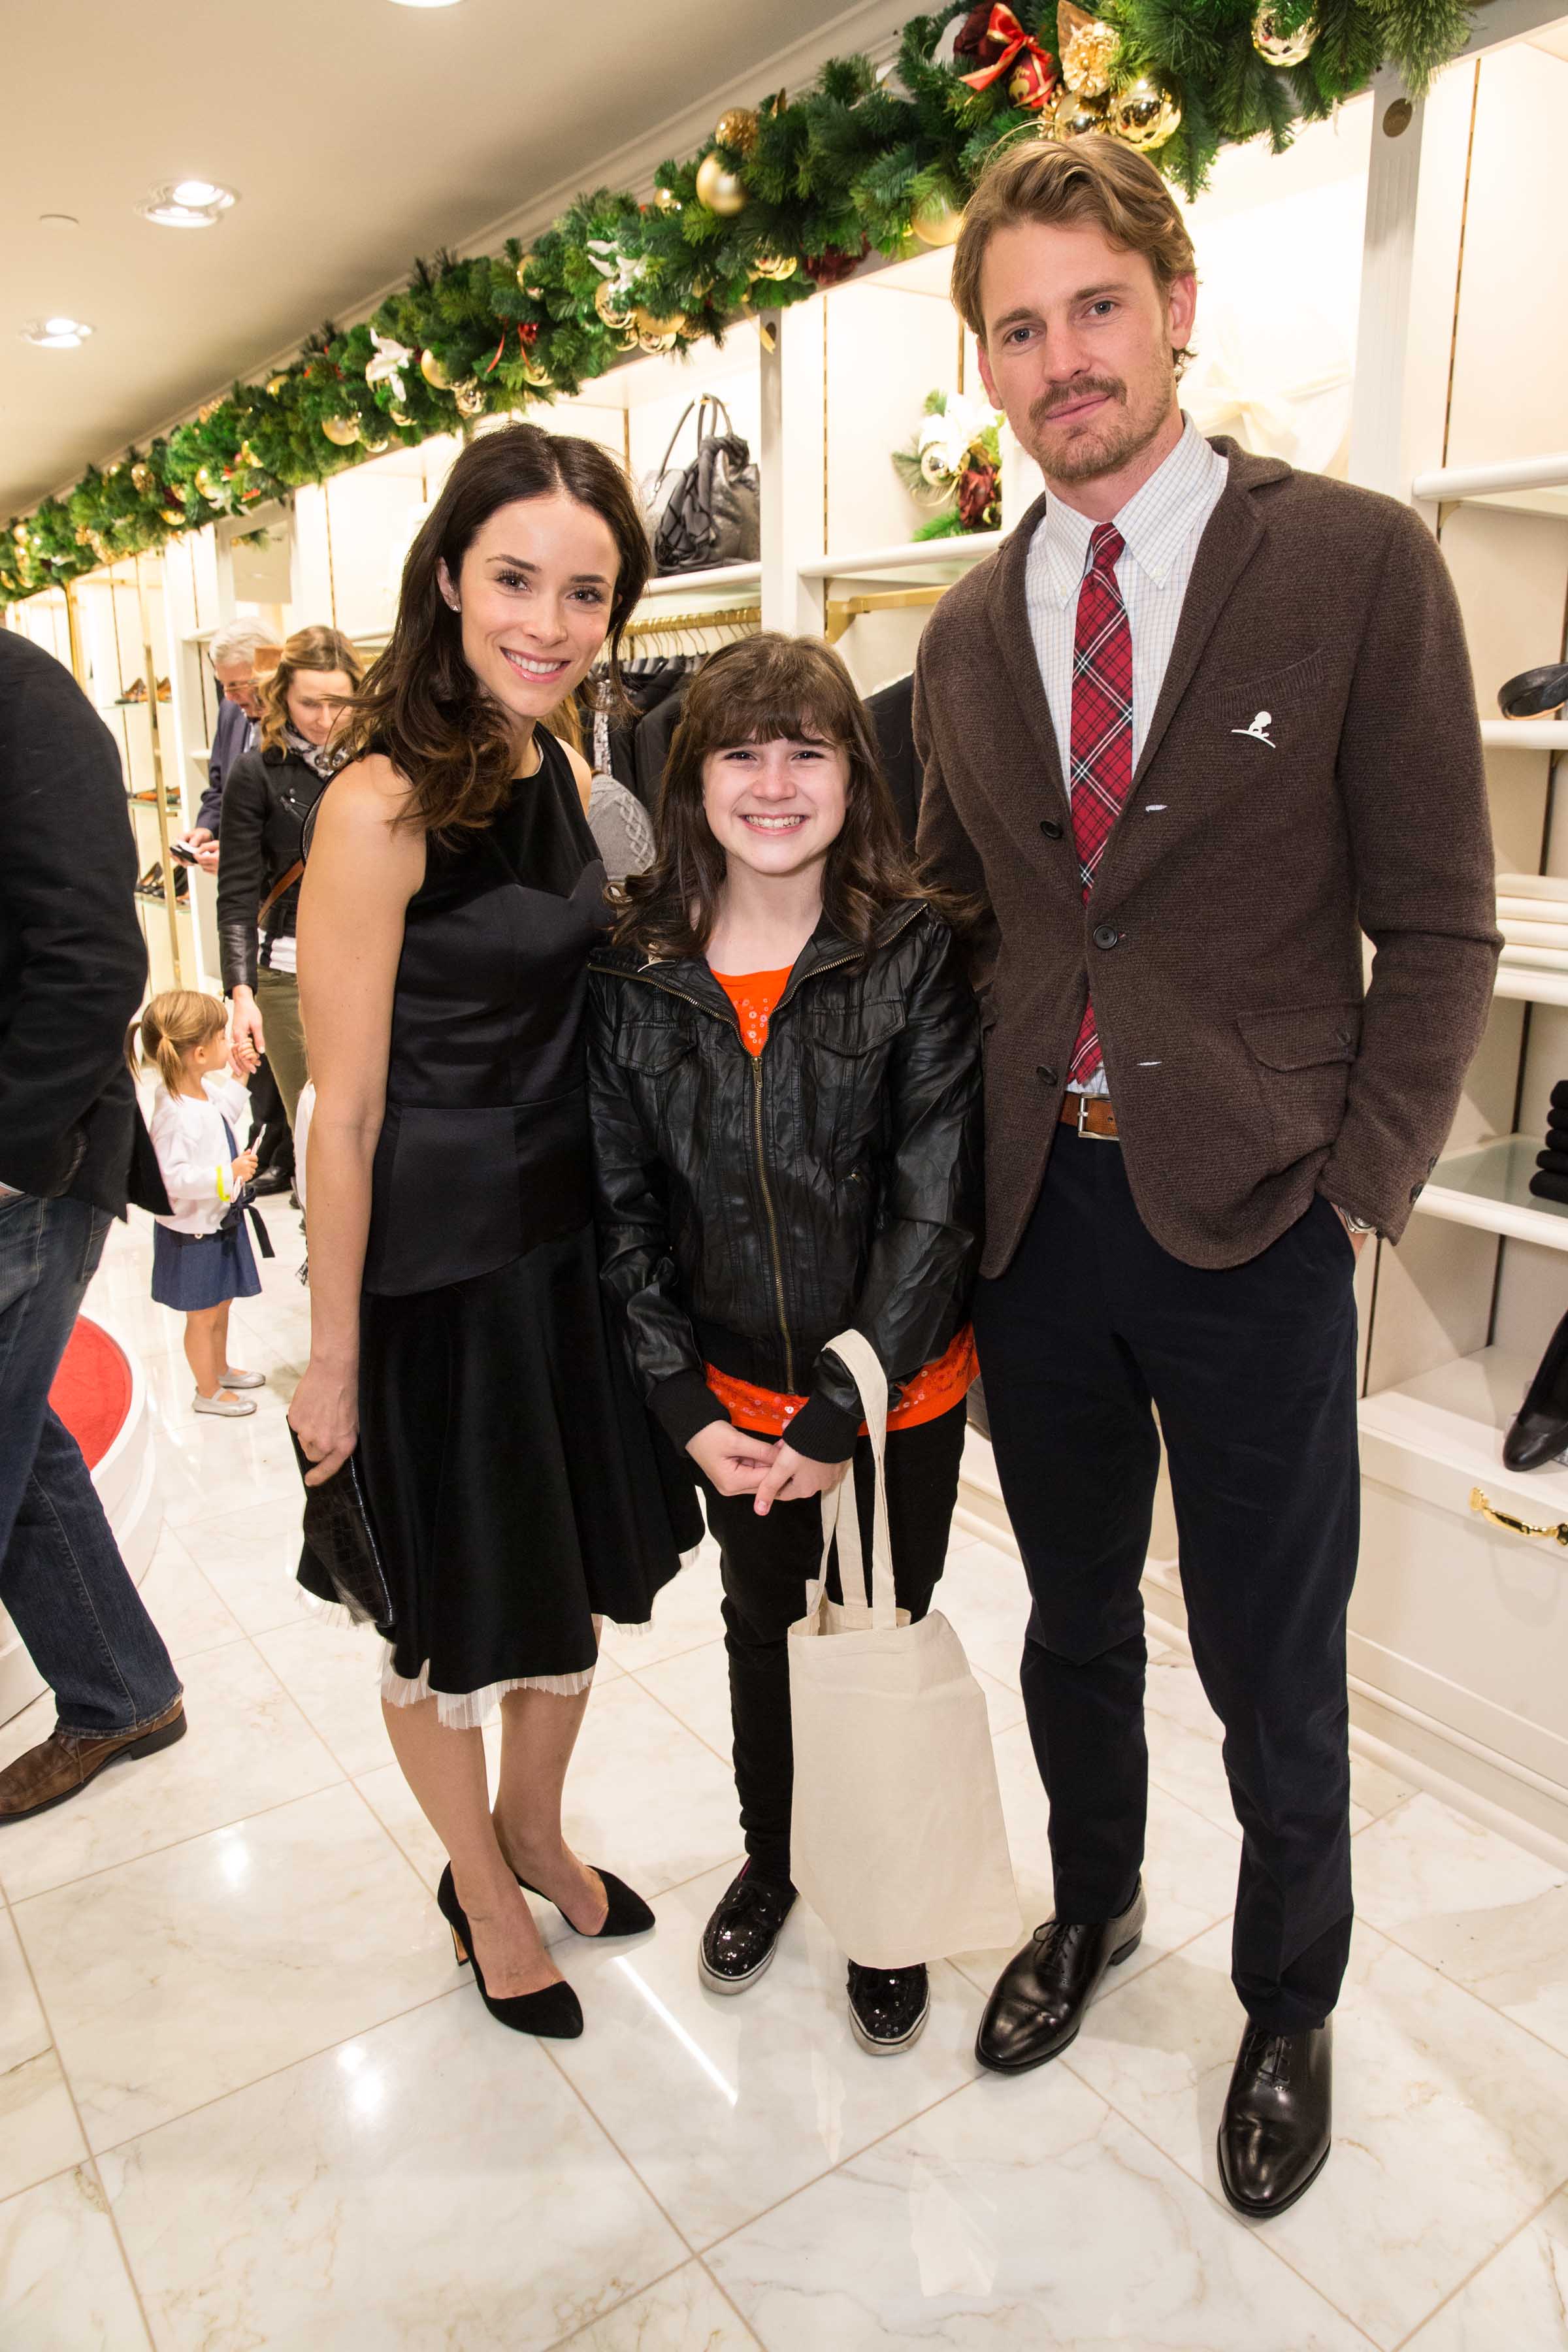 Brook Brothers' Holiday Celebration Benefiting St. Jude Children's Research Hospital